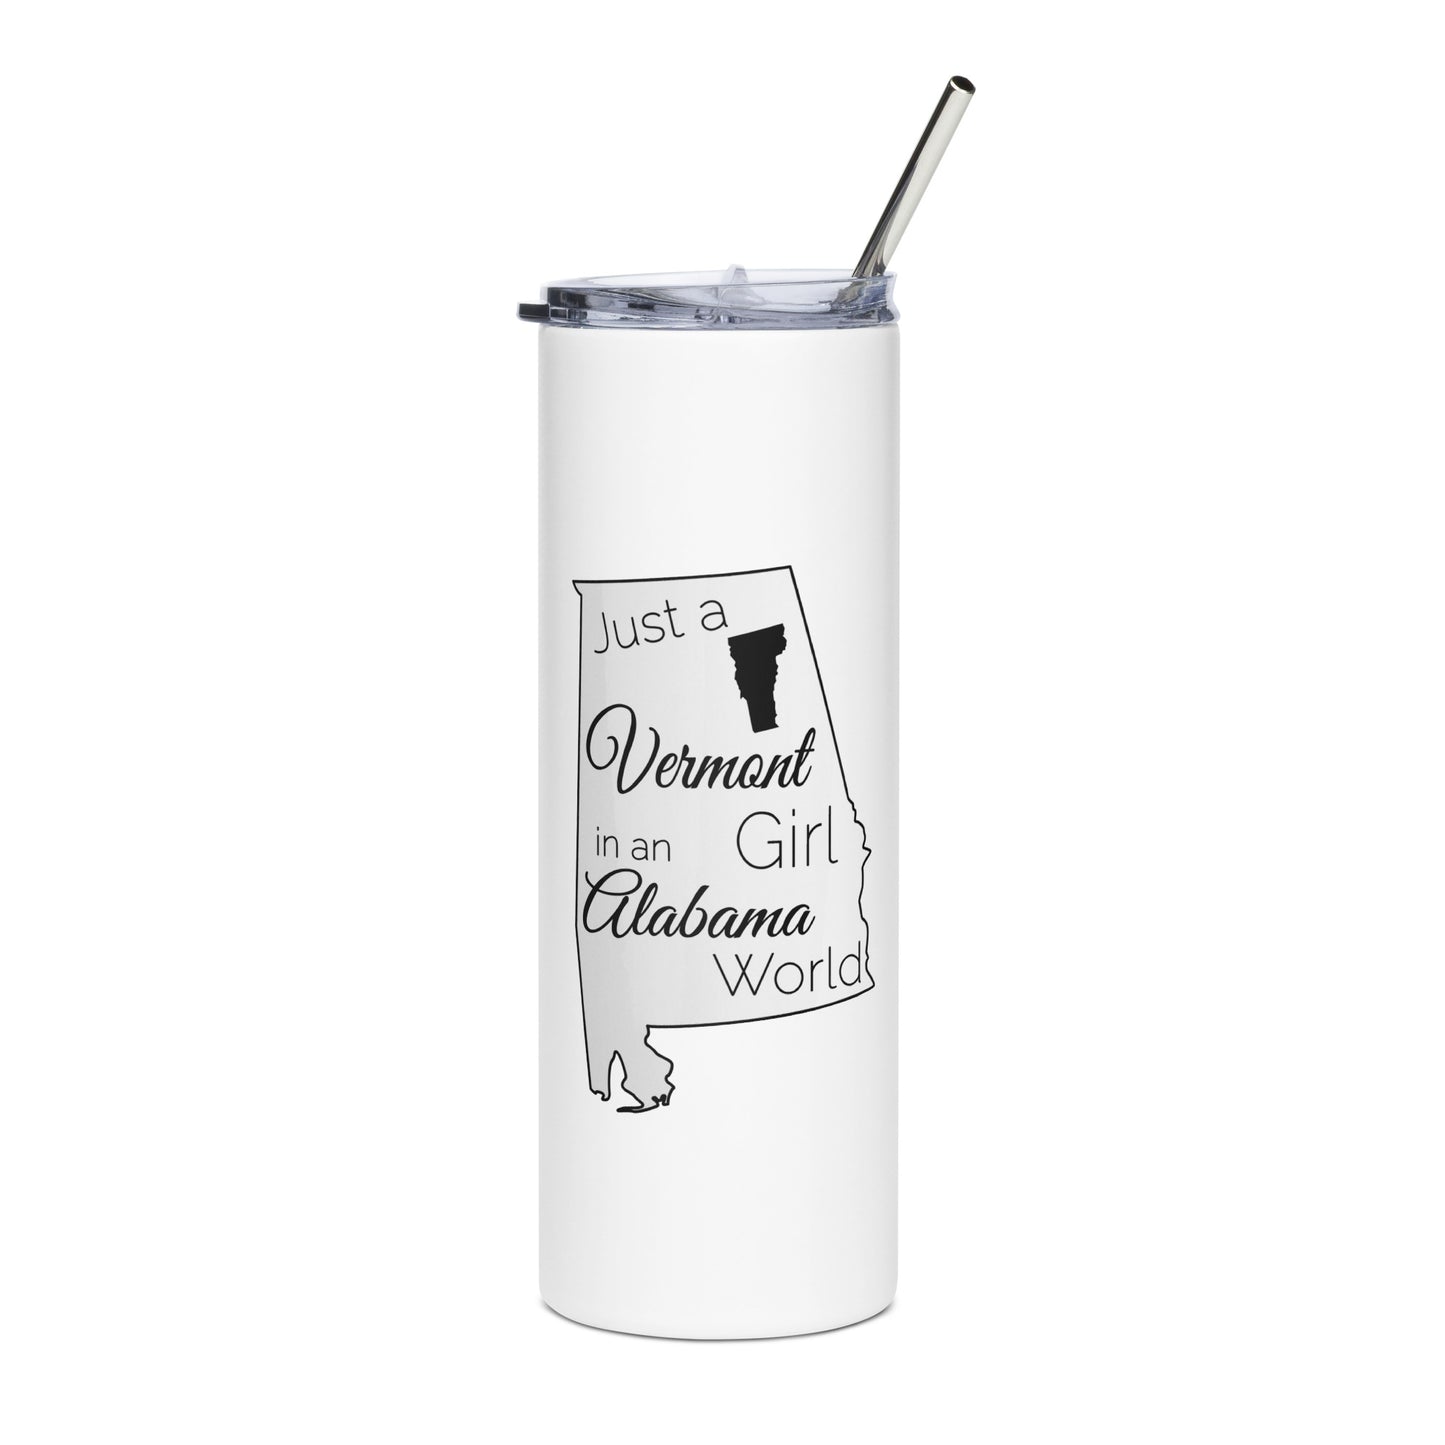 Just a Vermont Girl in an Alabama World Stainless steel tumbler